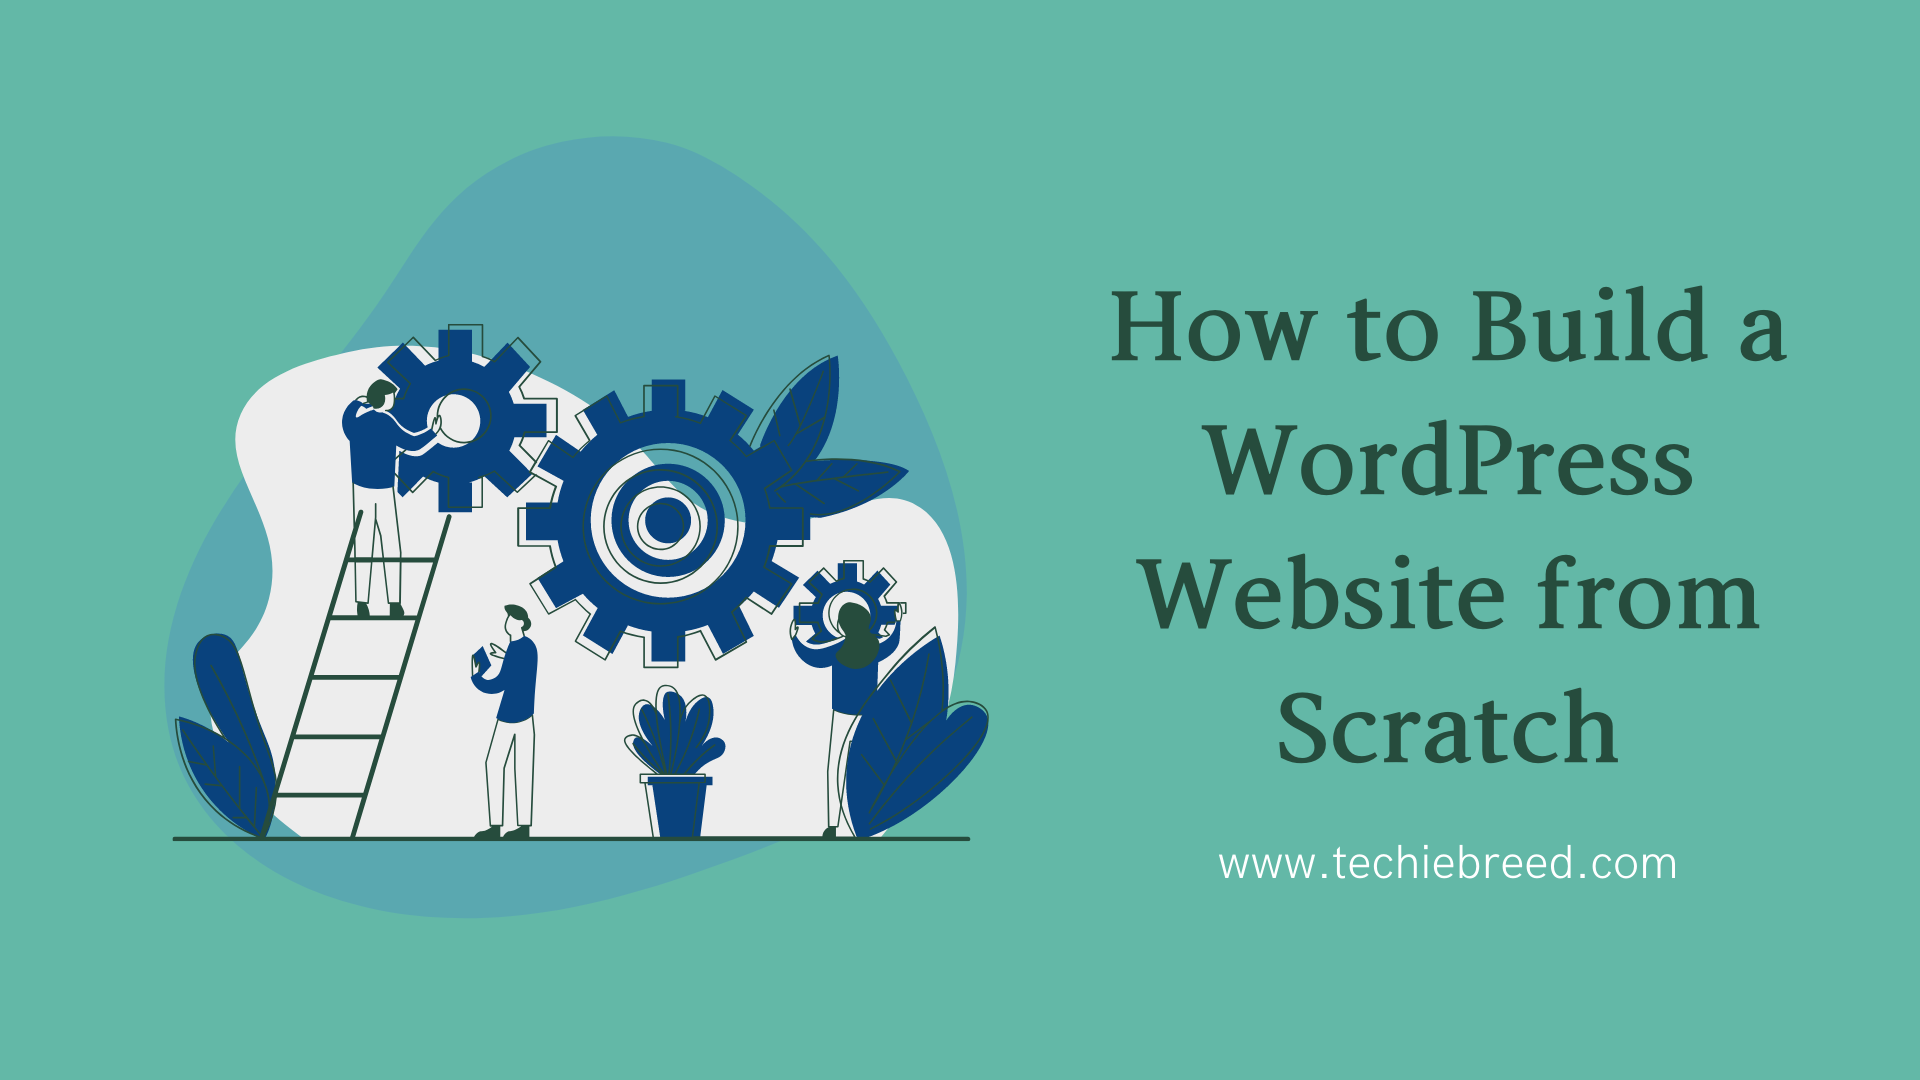 How to Build a WordPress Website from Scratch